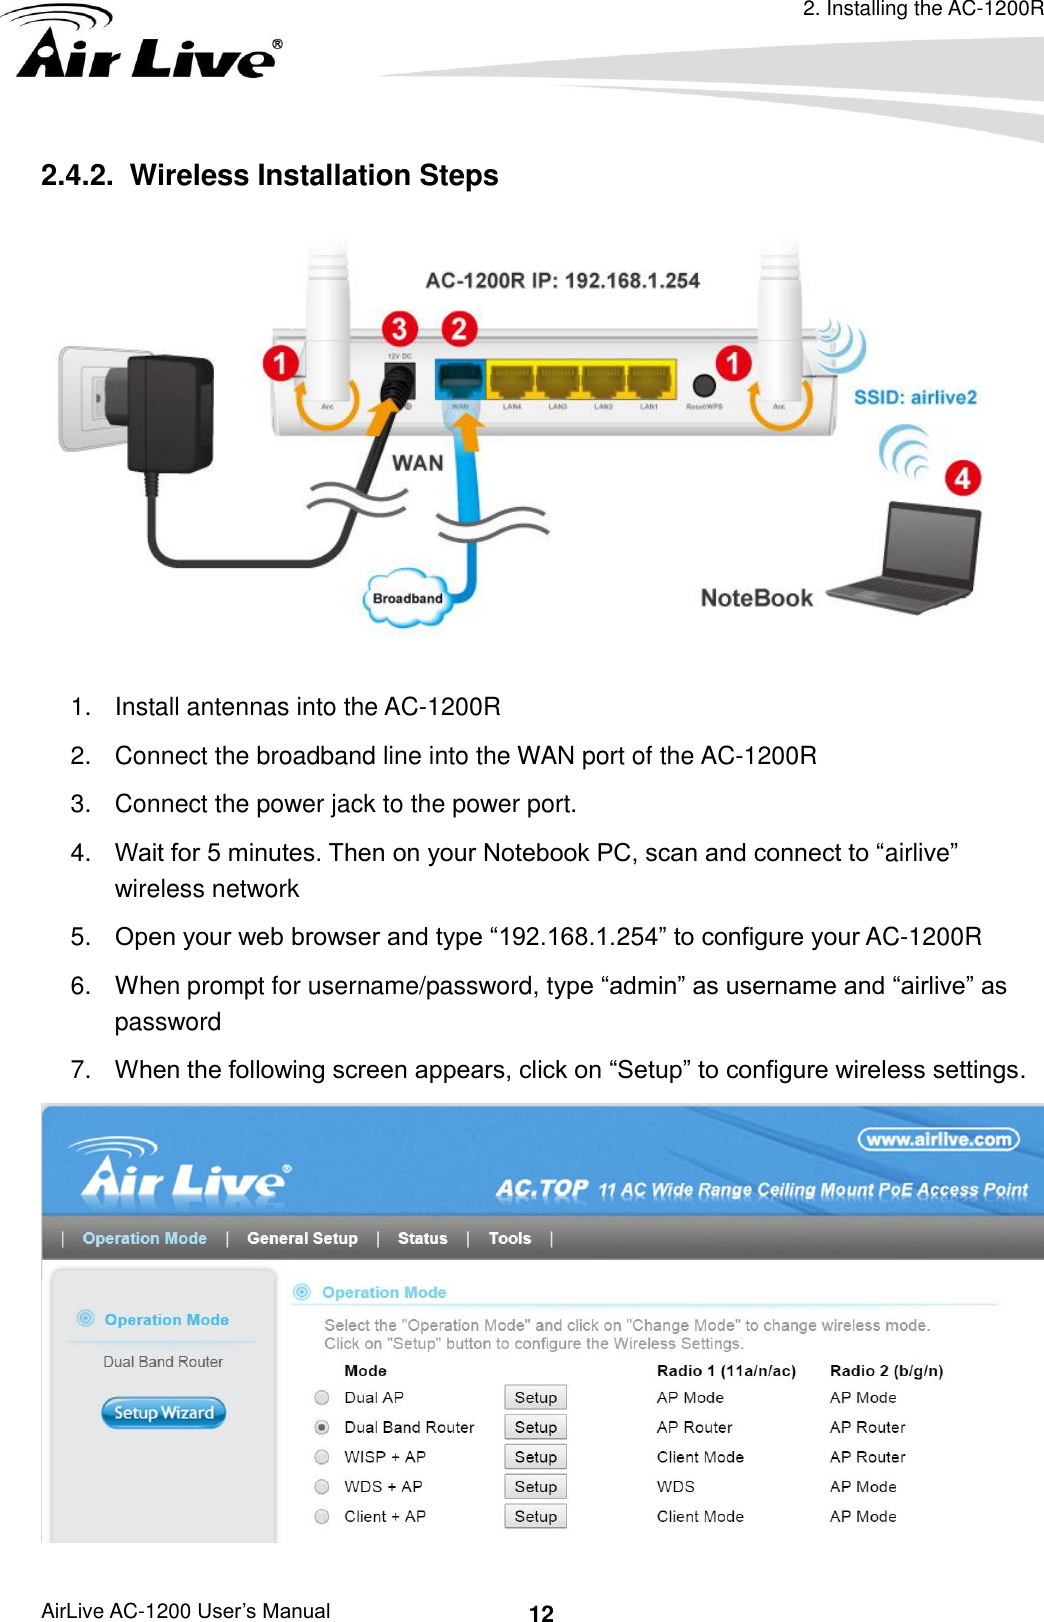 2. Installing the AC-1200R AirLive AC-1200 User’s Manual 12 2.4.2.   Wireless Installation Steps   1.  Install antennas into the AC-1200R   2.  Connect the broadband line into the WAN port of the AC-1200R   3.  Connect the power jack to the power port. 4. Wait for 5 minutes. Then on your Notebook PC, scan and connect to “airlive” wireless network 5. Open your web browser and type “192.168.1.254” to configure your AC-1200R 6.  When prompt for username/password, type “admin” as username and “airlive” as password 7. When the following screen appears, click on “Setup” to configure wireless settings.  